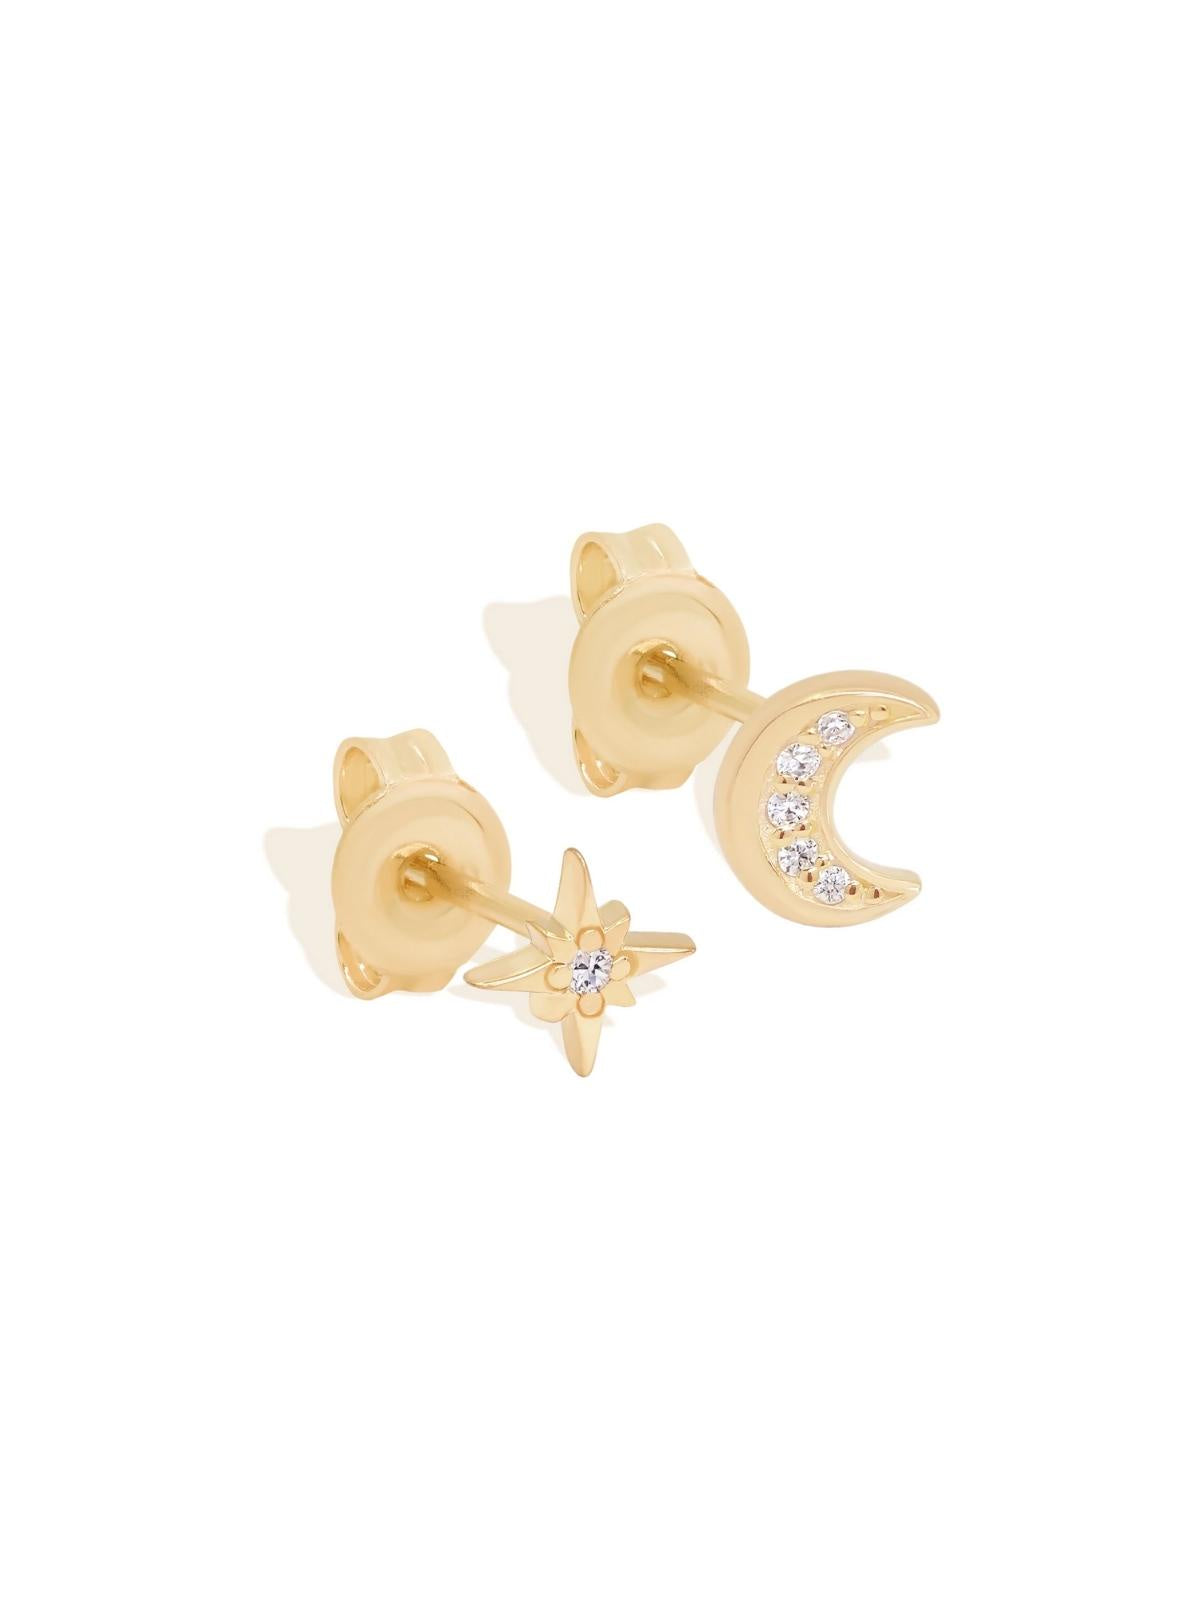 Bathed In Your Light Studs - Gold Earrings By Charlotte 